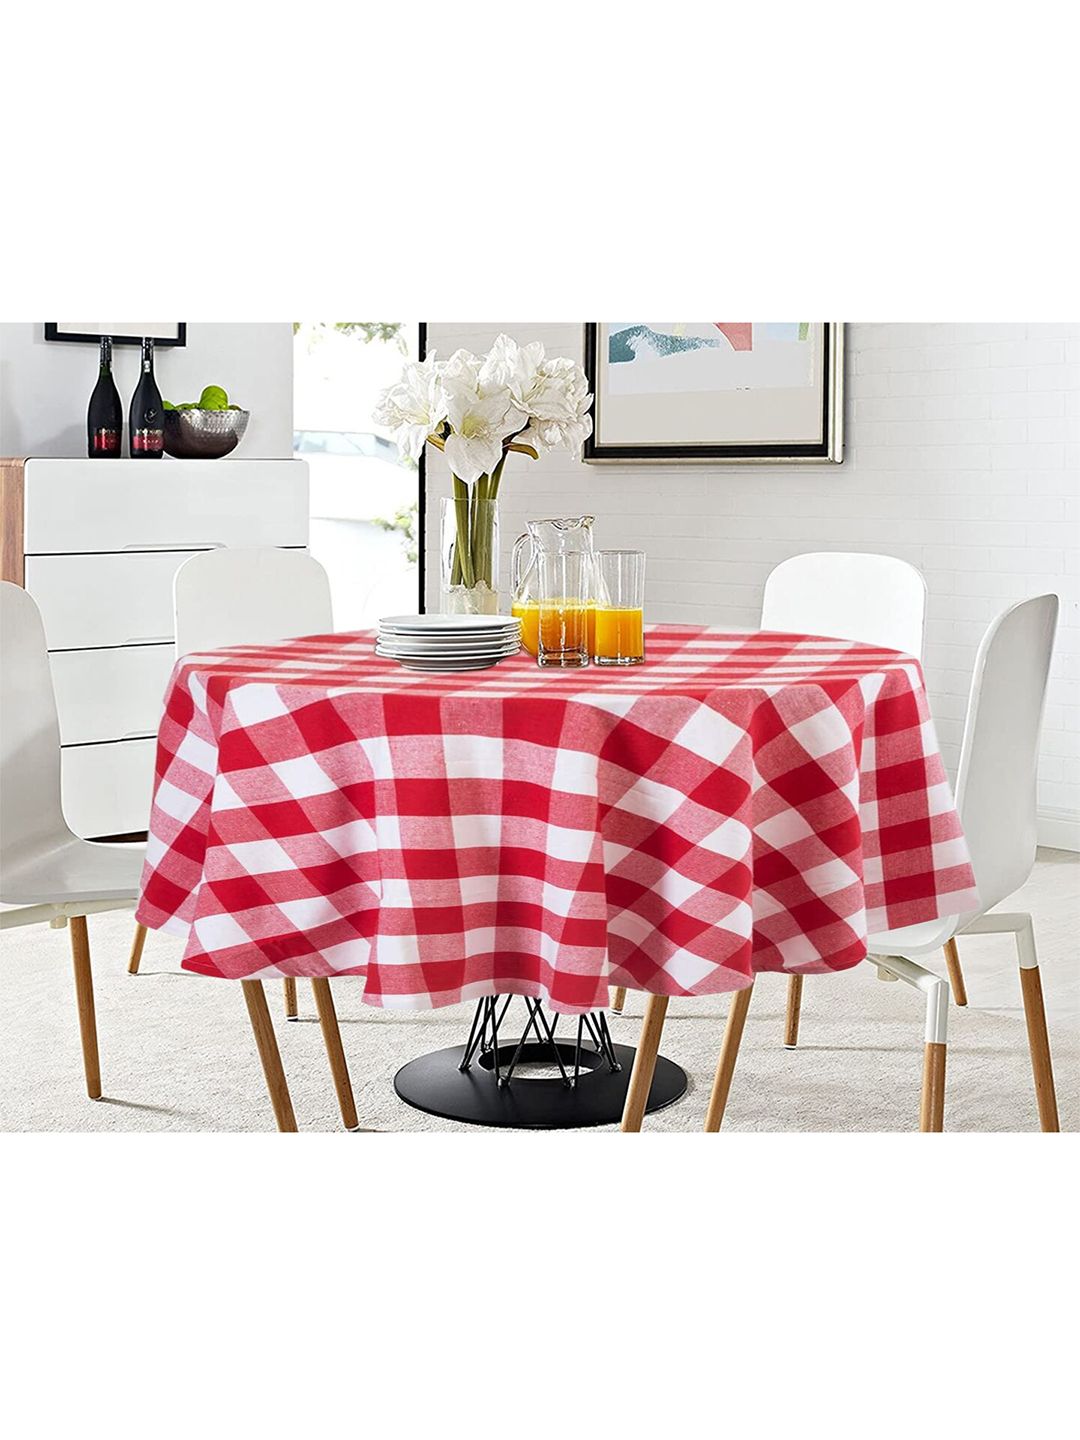 Lushomes Buffalo Checks Red Plaid Dining Table Cover Cloth Price in India